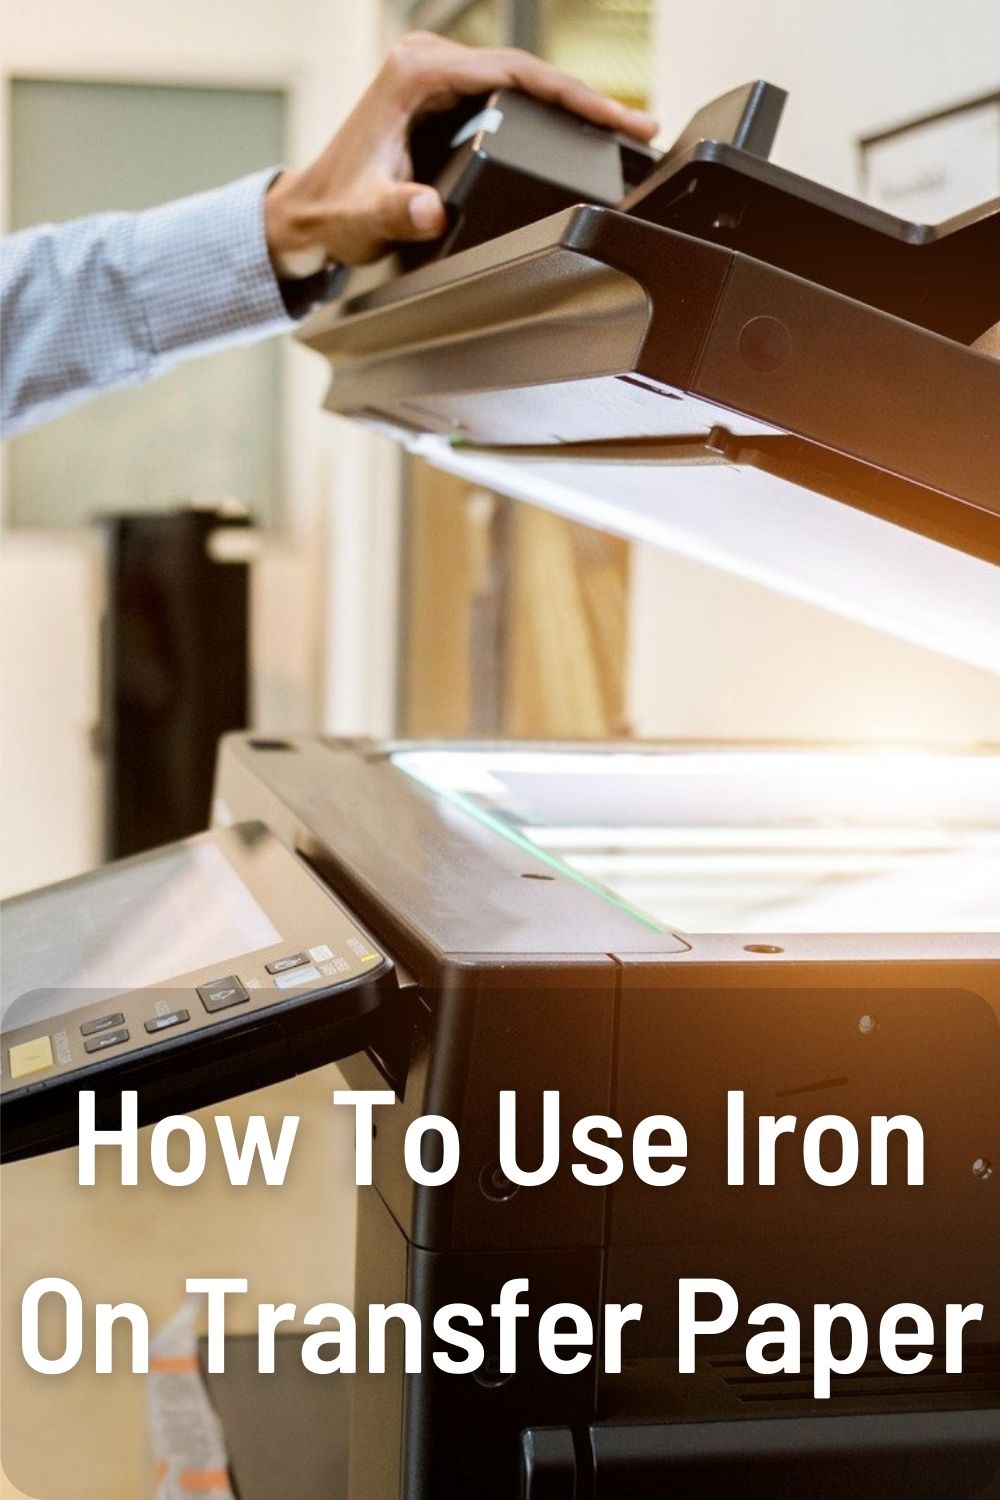 How To Use Iron On Transfer Paper